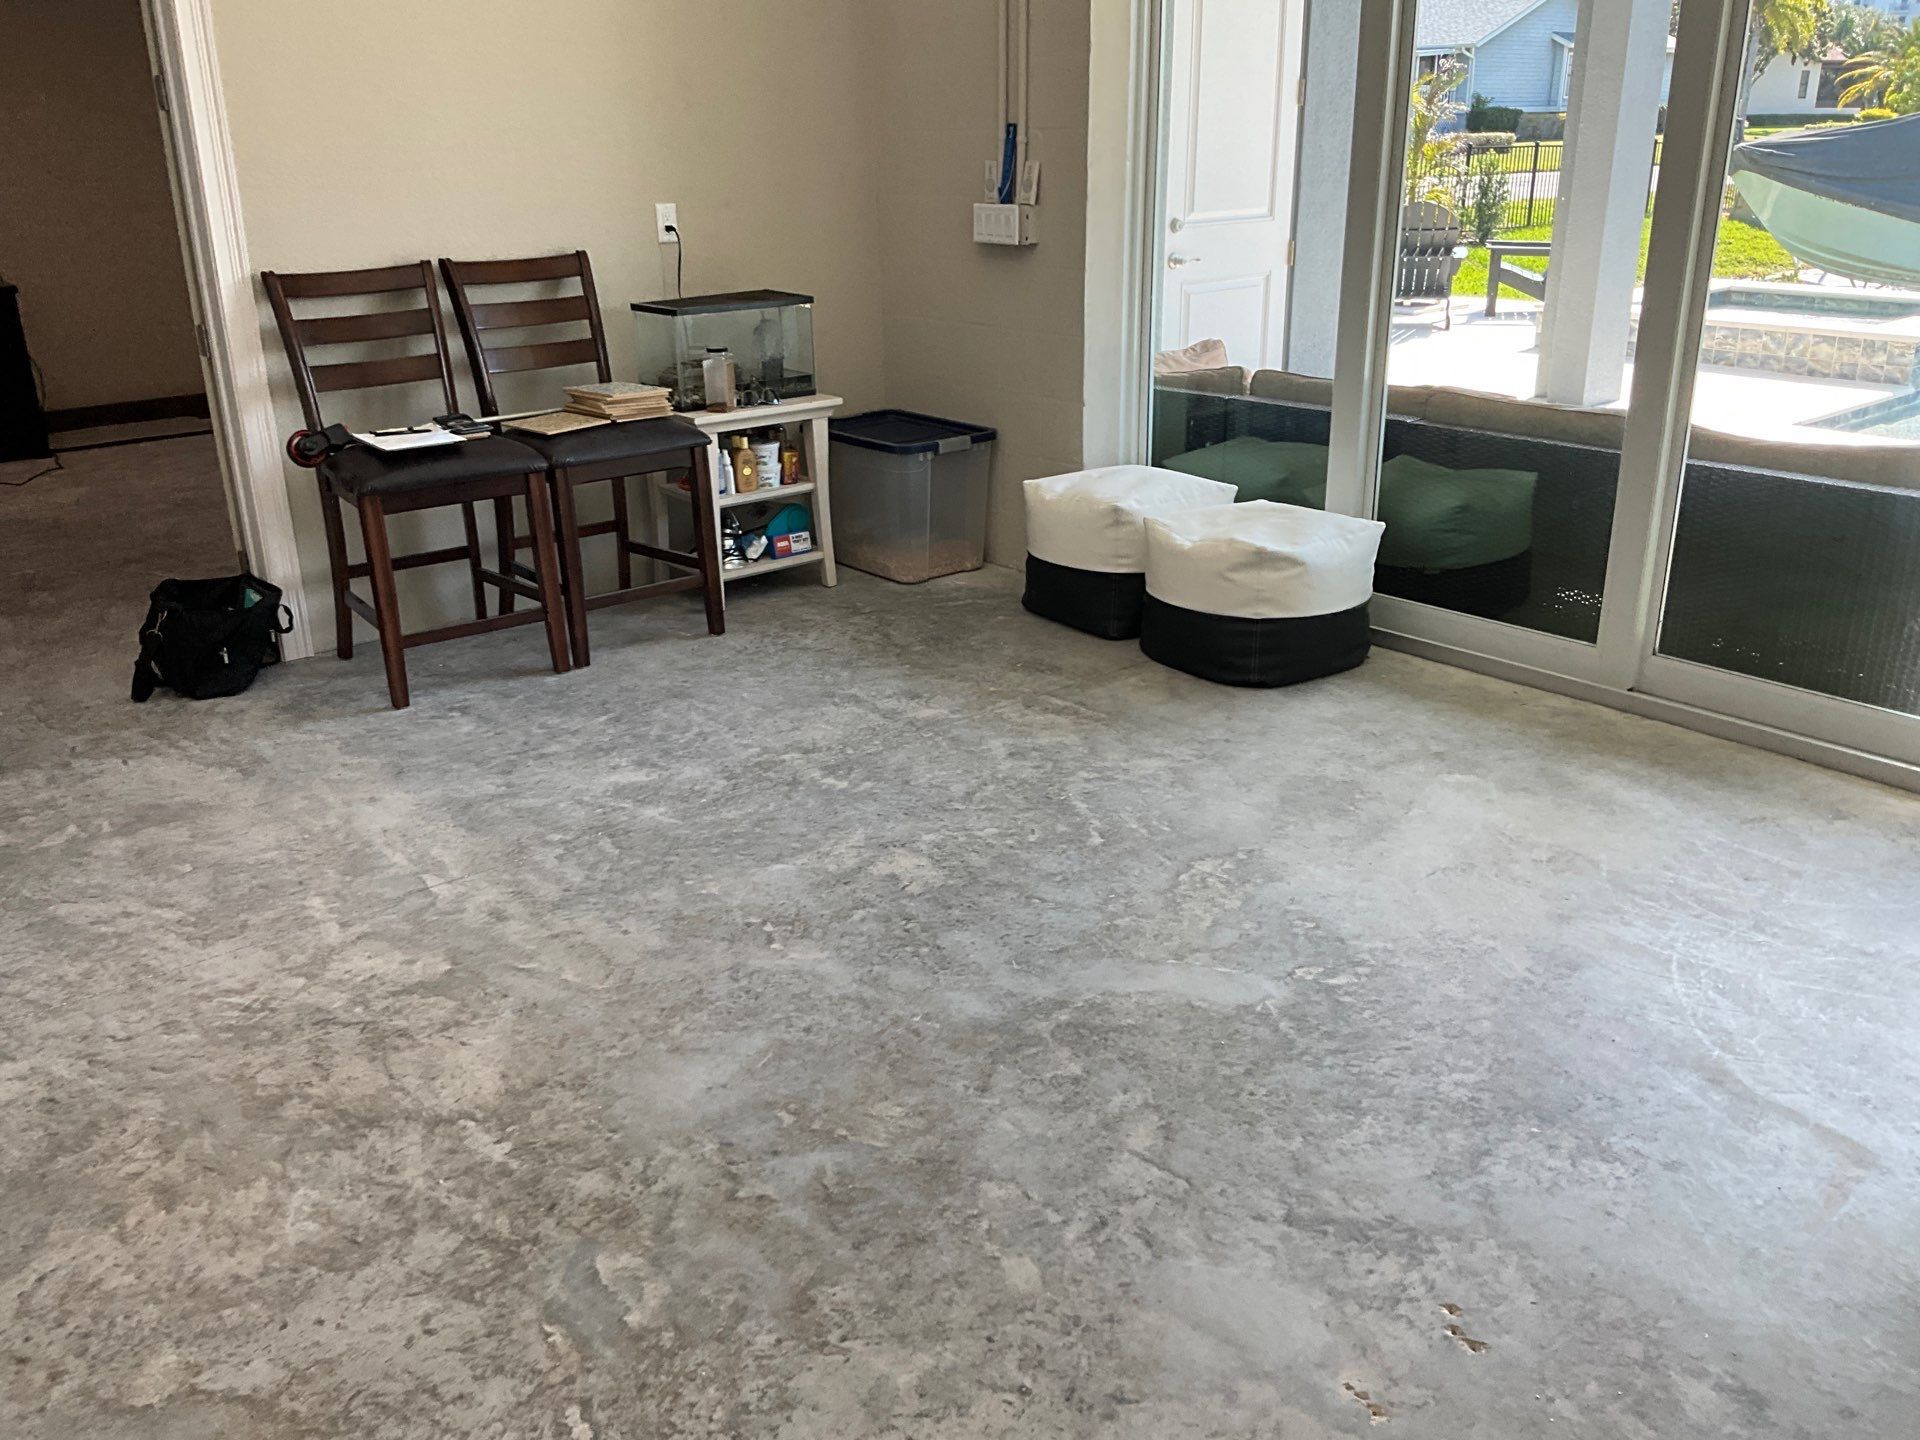 interior room with dirty and bare concrete floor